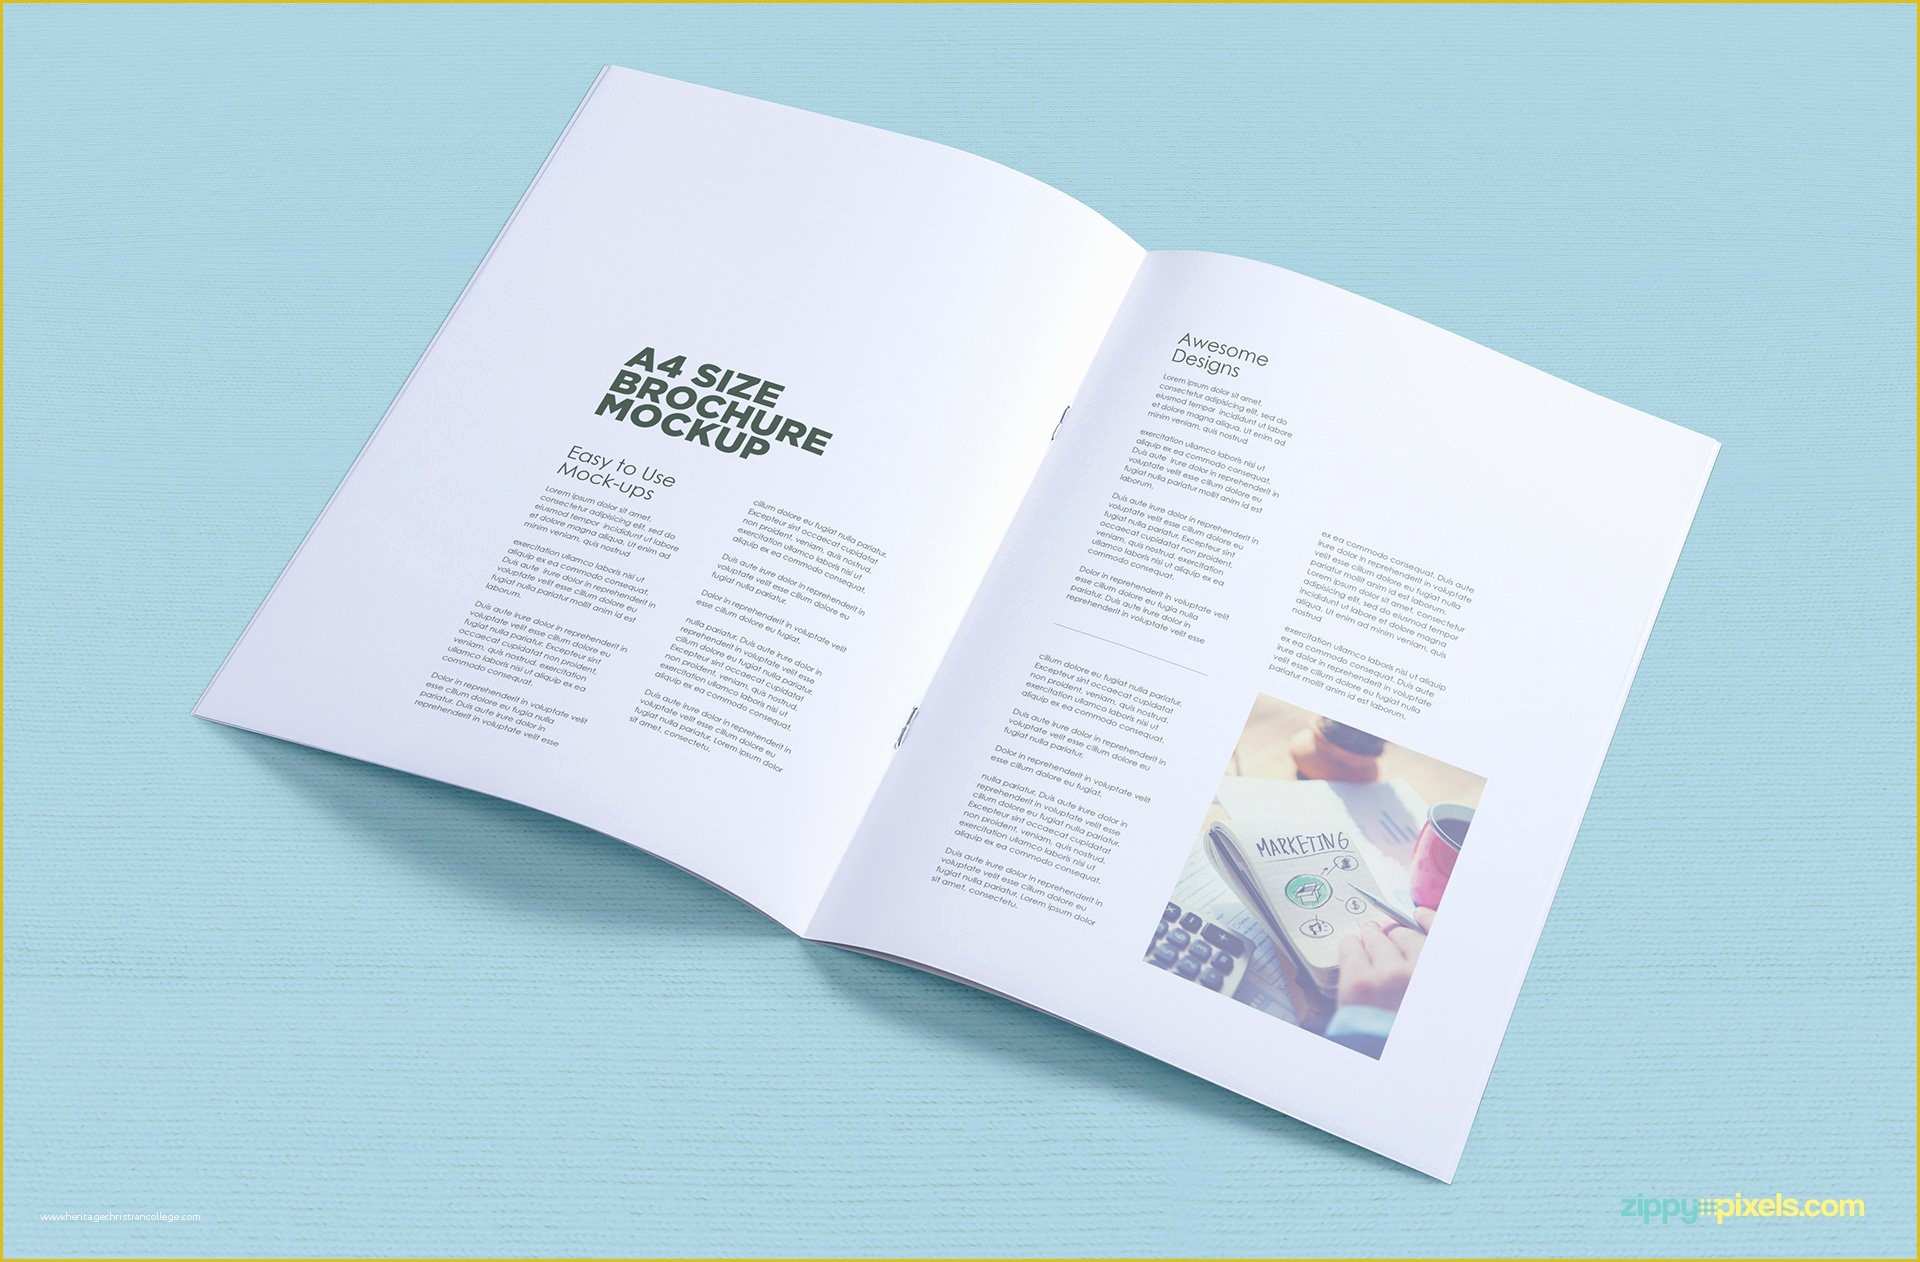 A4 Size Brochure Templates Psd Free Download Of A4 Brochure Mockup Free Psd Download